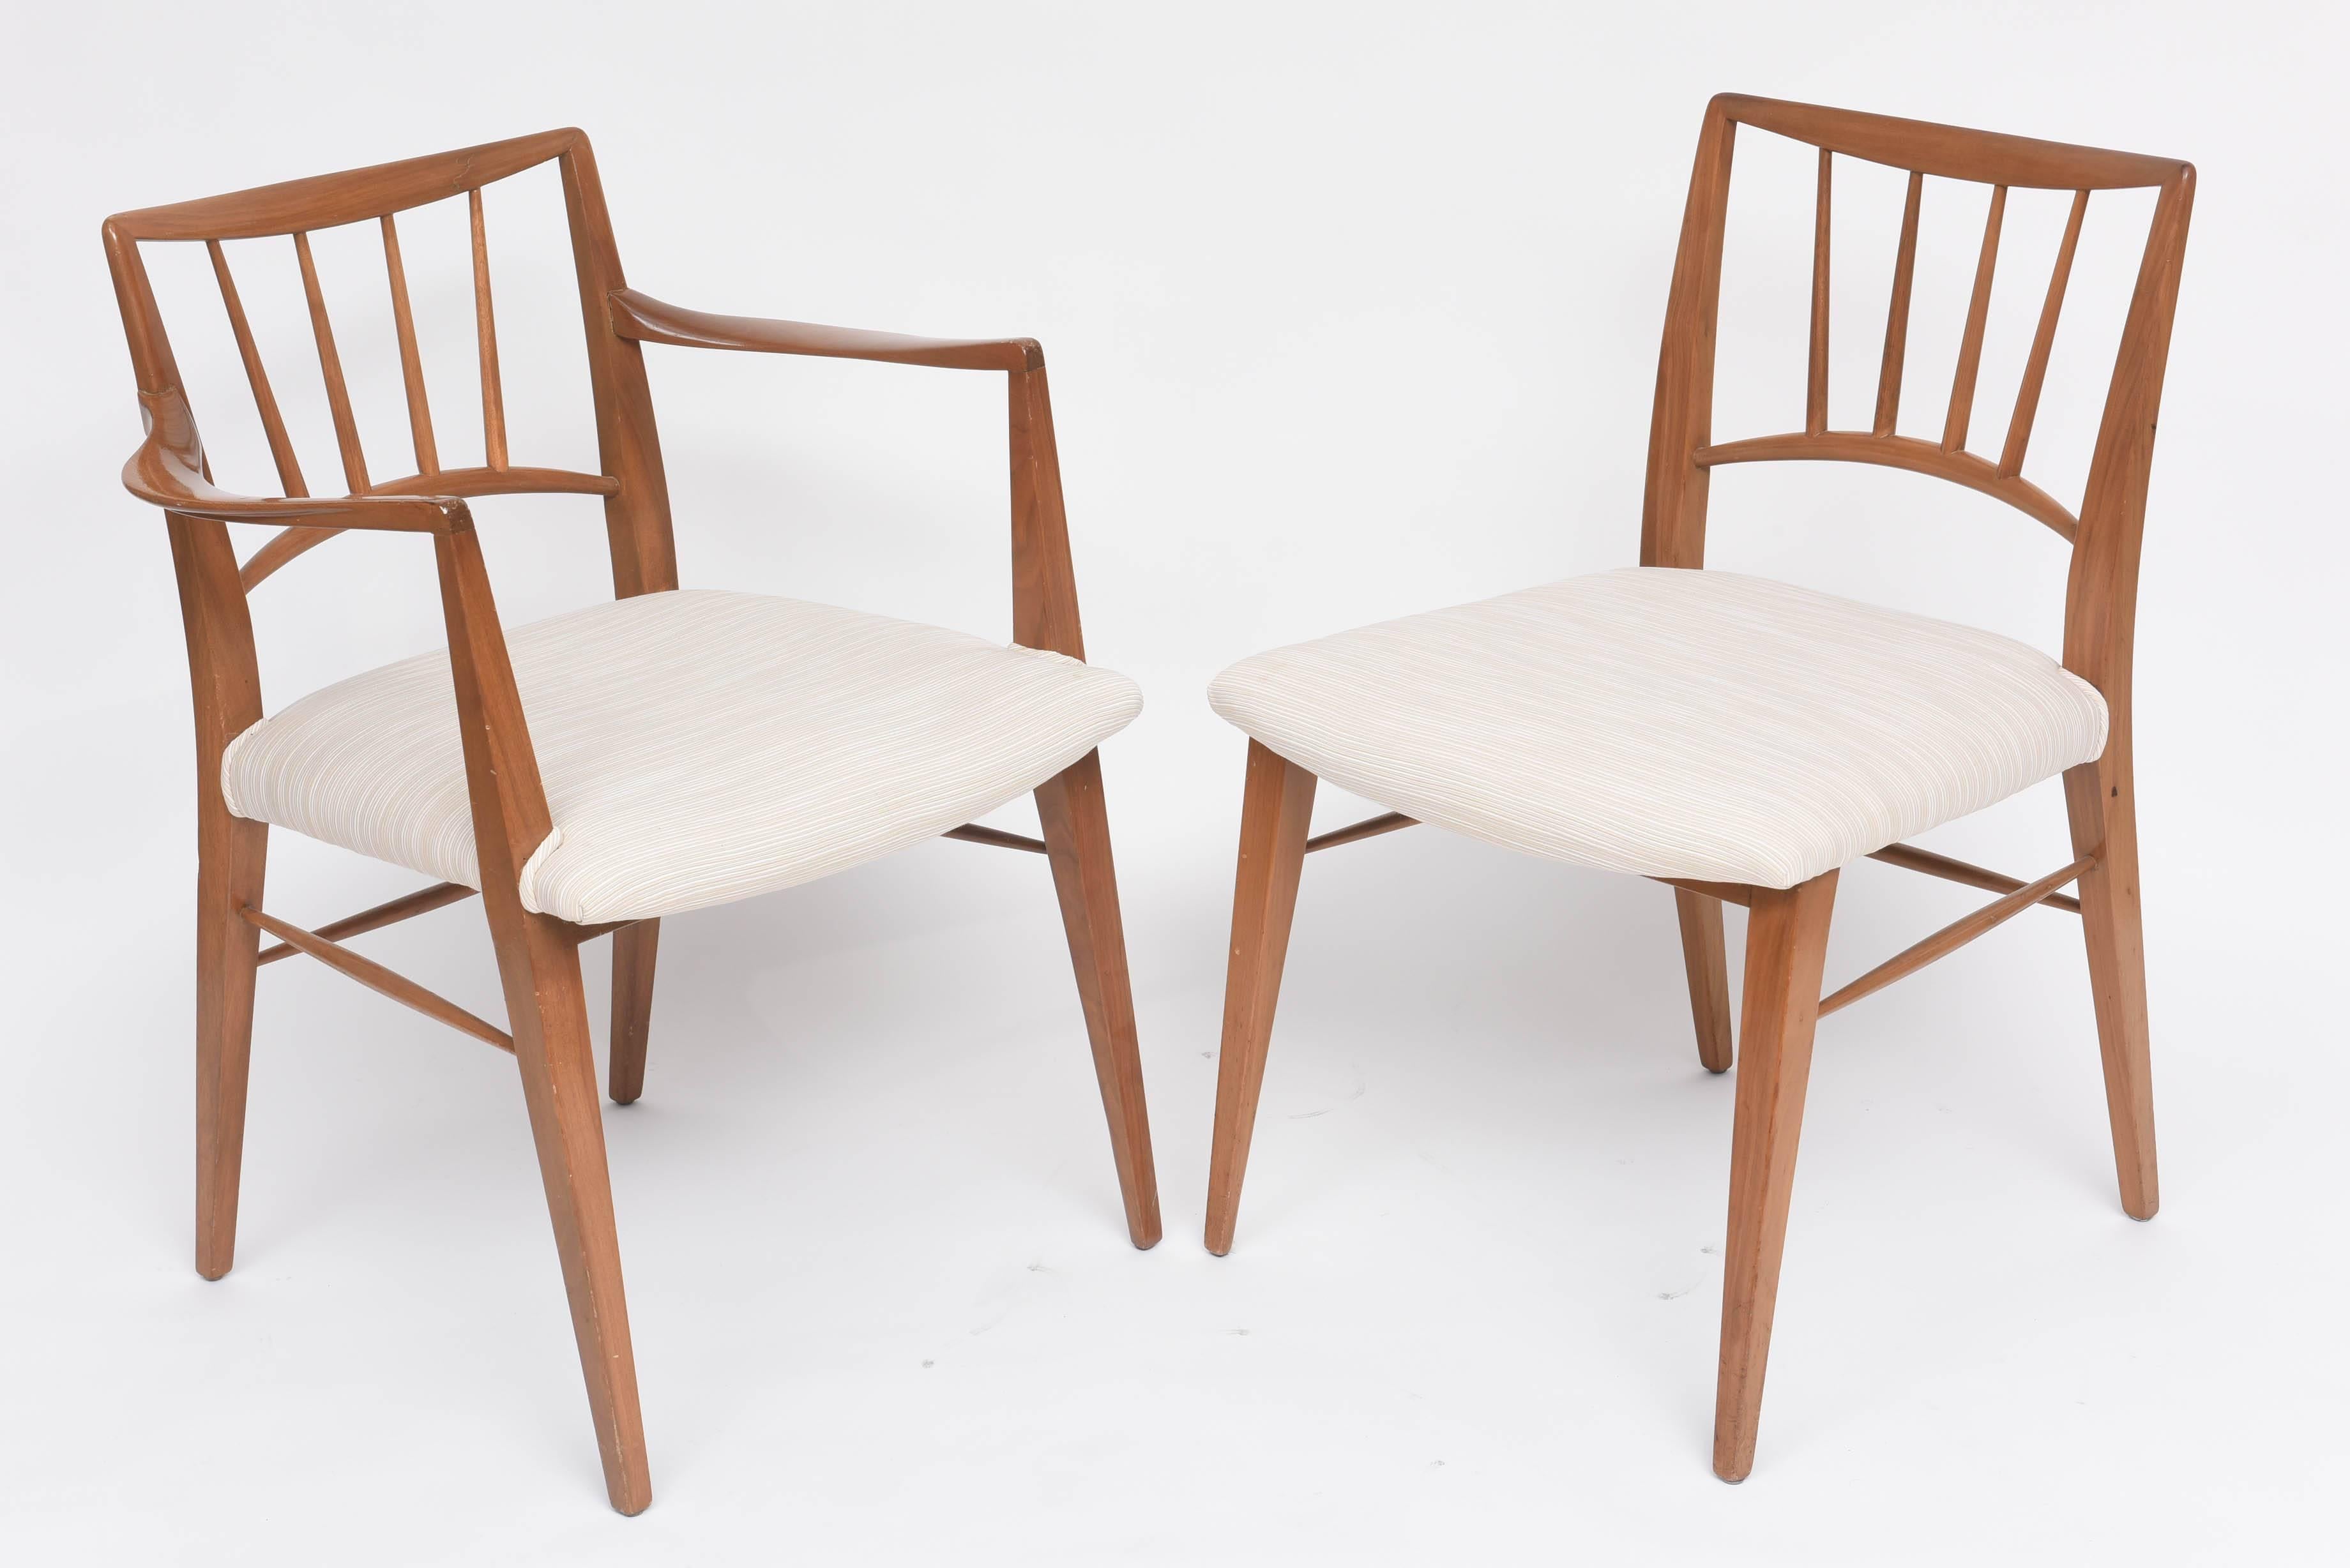 Mid-20th Century Set of Six Mid-Century Modern Dining Chairs by Edward Wormley for Dunbar